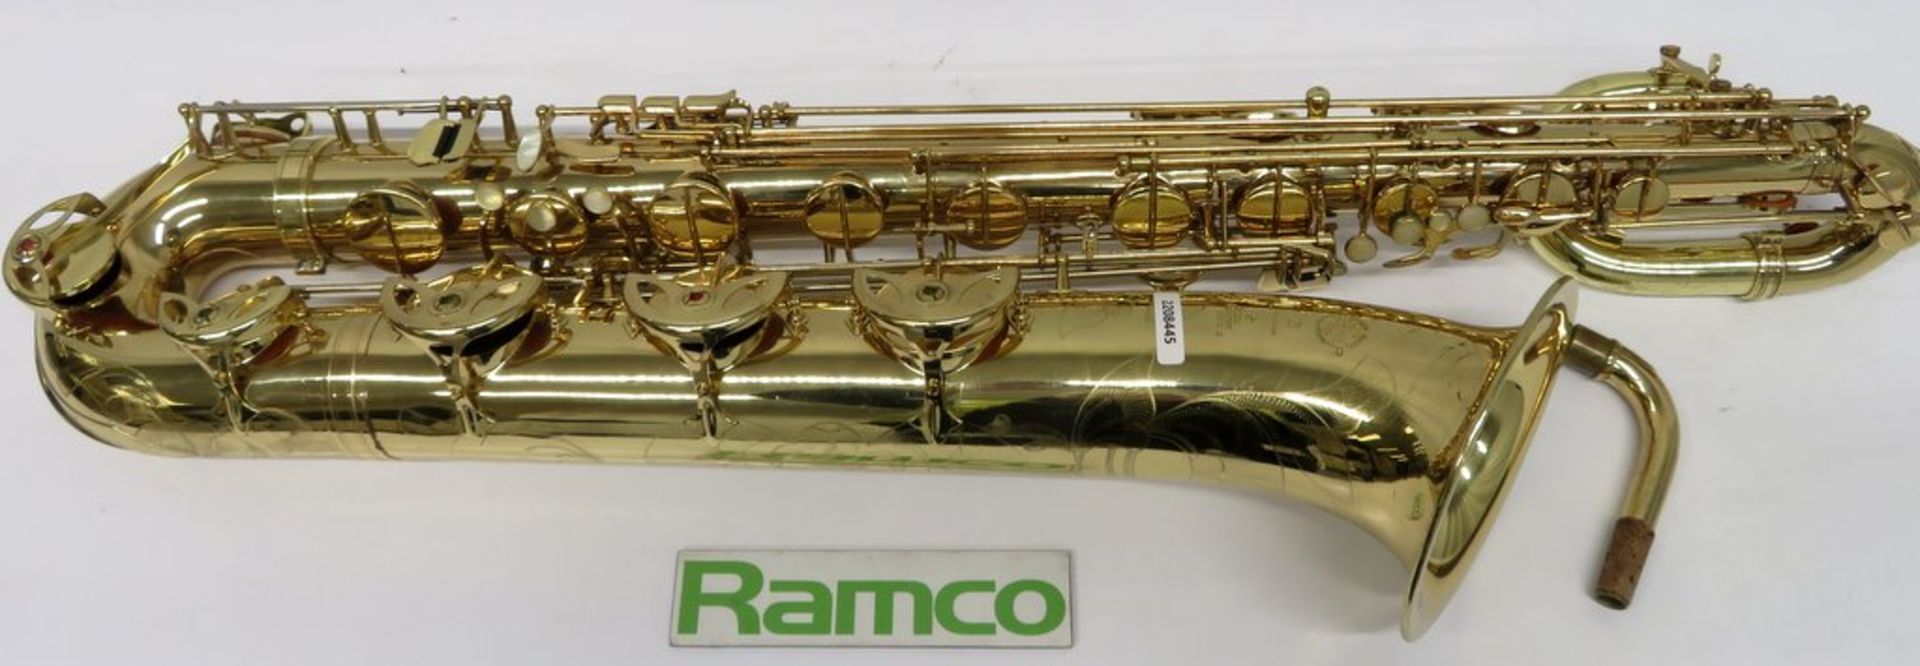 Henri Selmer Super Action 80 Serie 2 Baritone Saxophone With Case. Serial Number: N527543. - Image 3 of 19